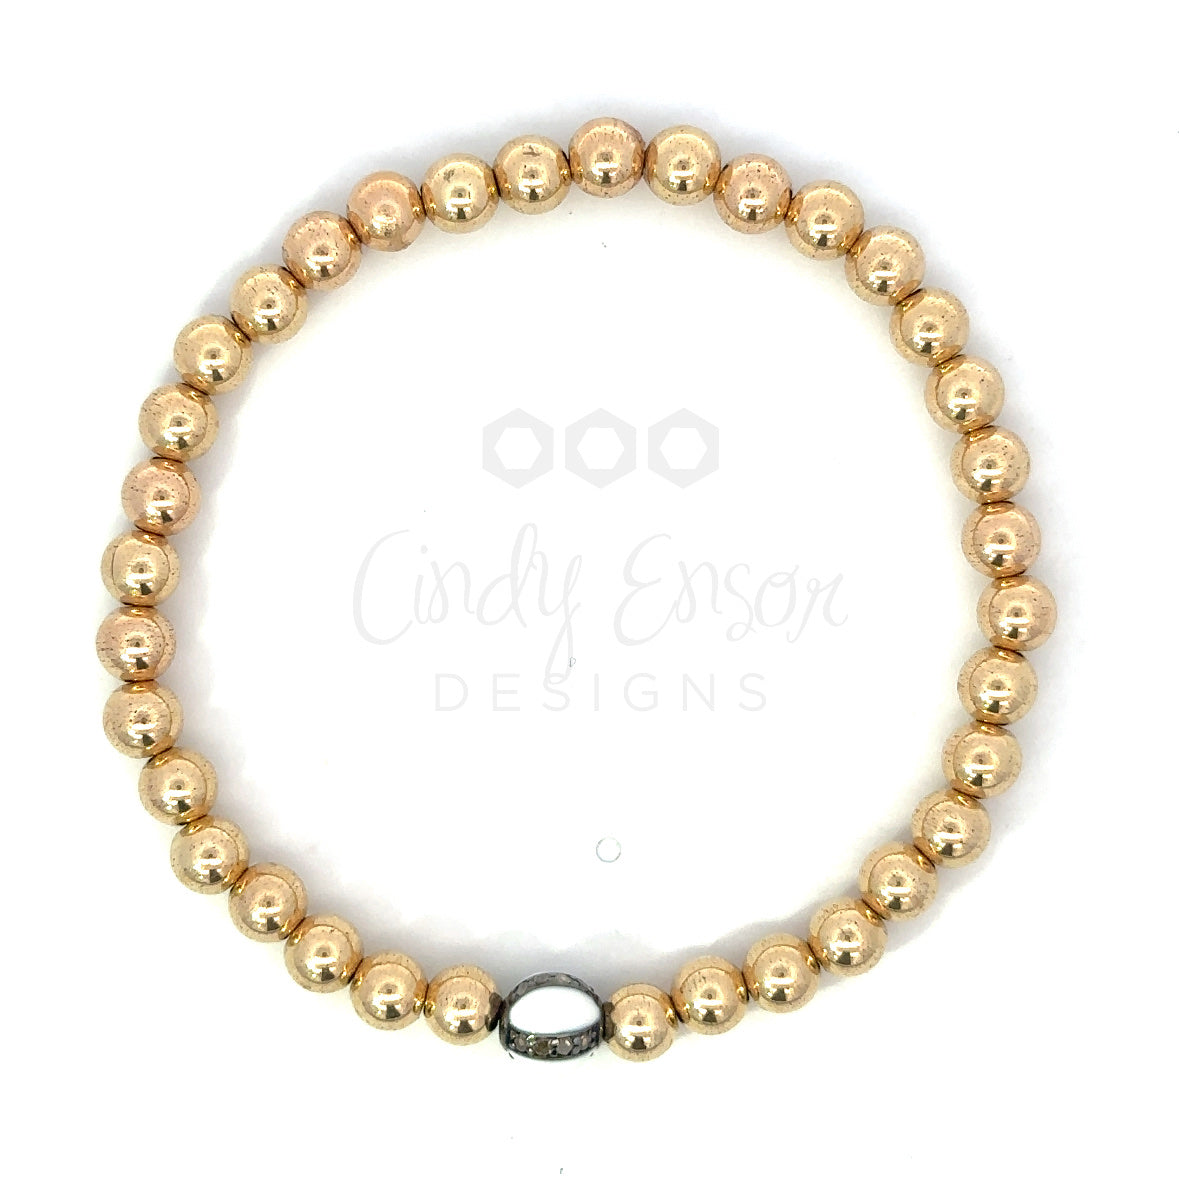 5mm Gold Filled Bead with 6mm Enamel Pave Bead Bracelet